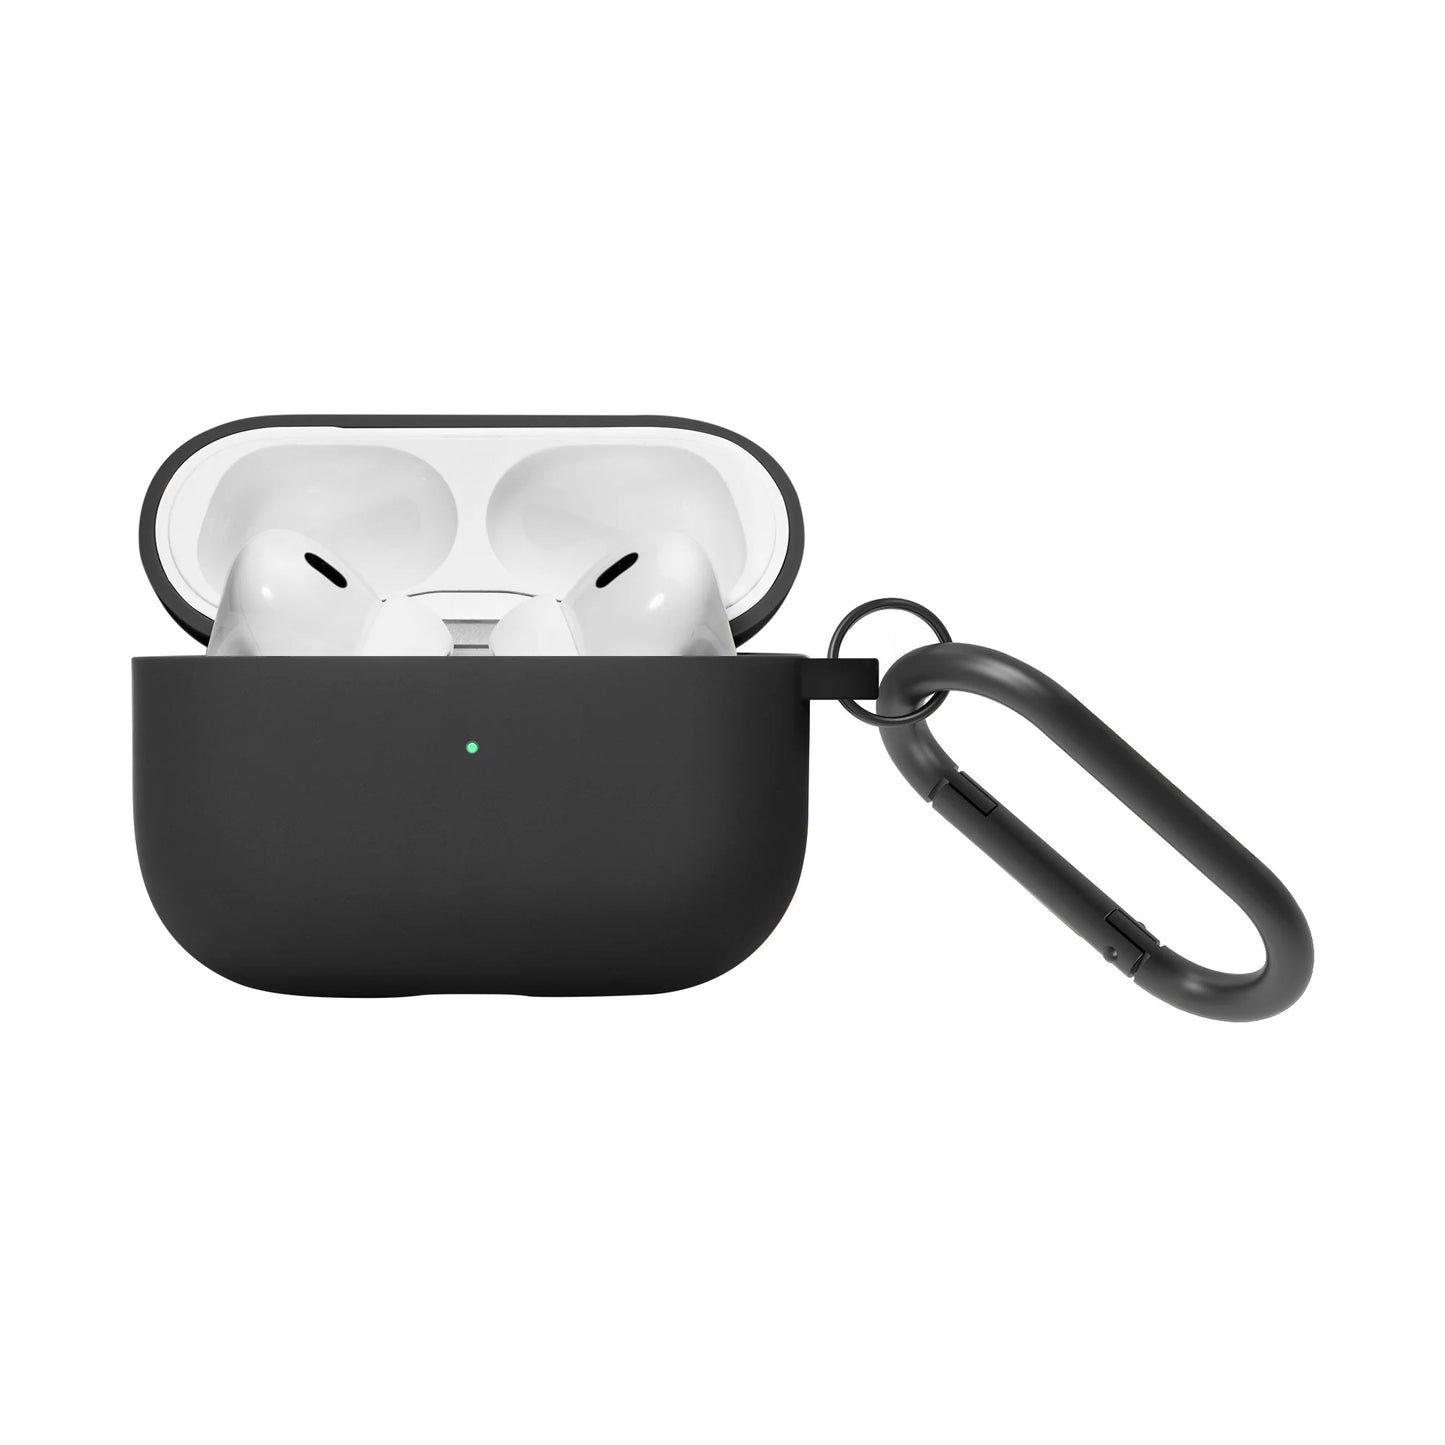 Native Union Roam Case for AirPods Pro (2nd Gen)